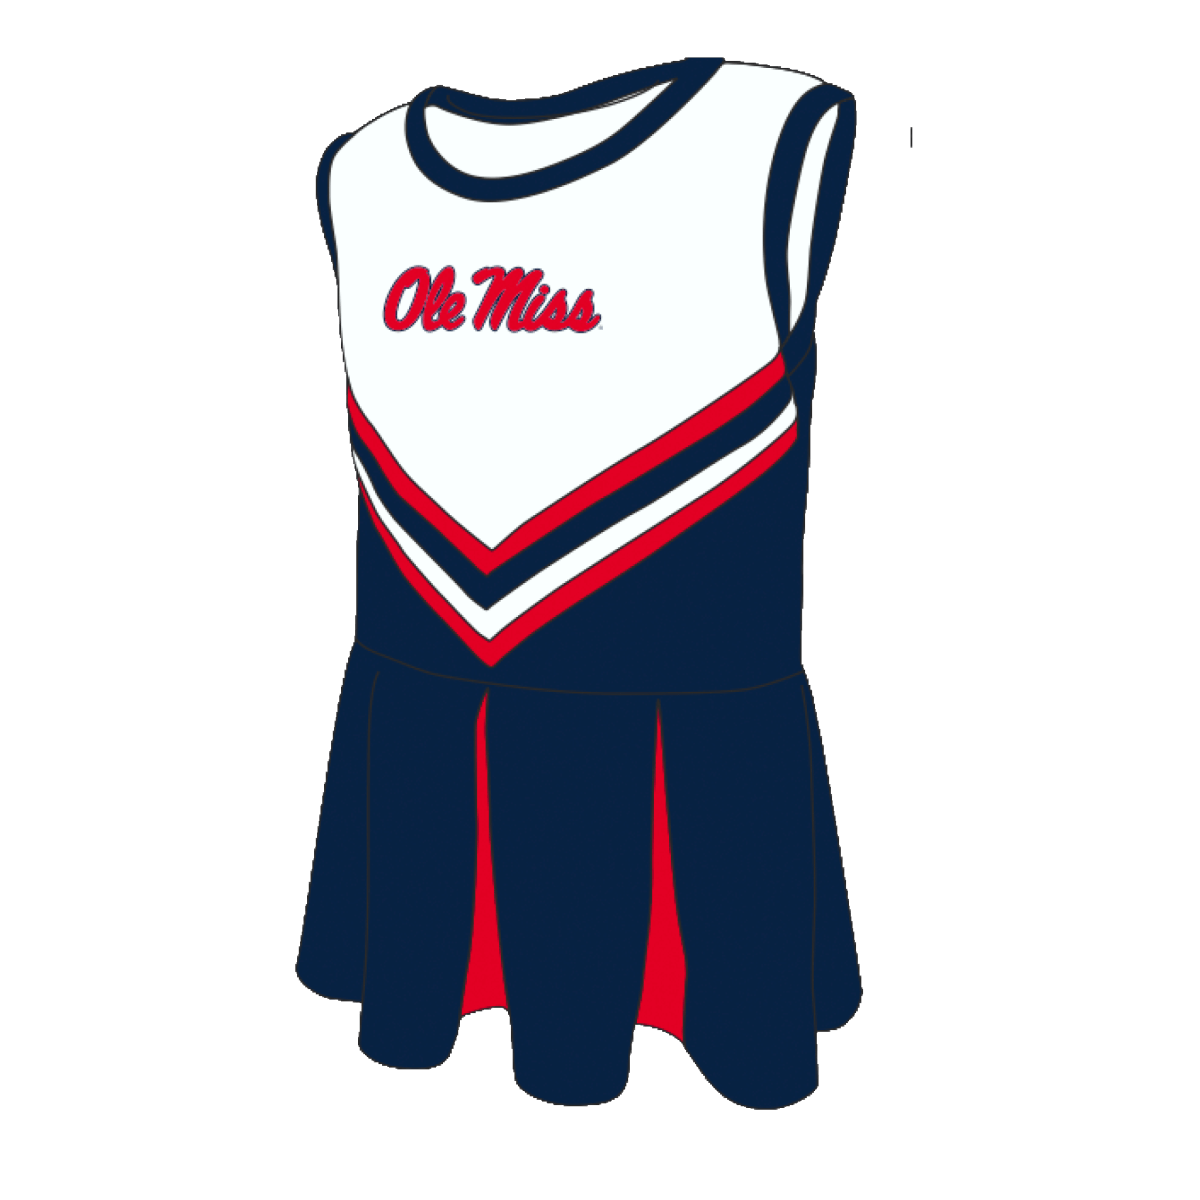 University of Mississippi Kids Pleated Cheer Dress - Shop B-Unlimited